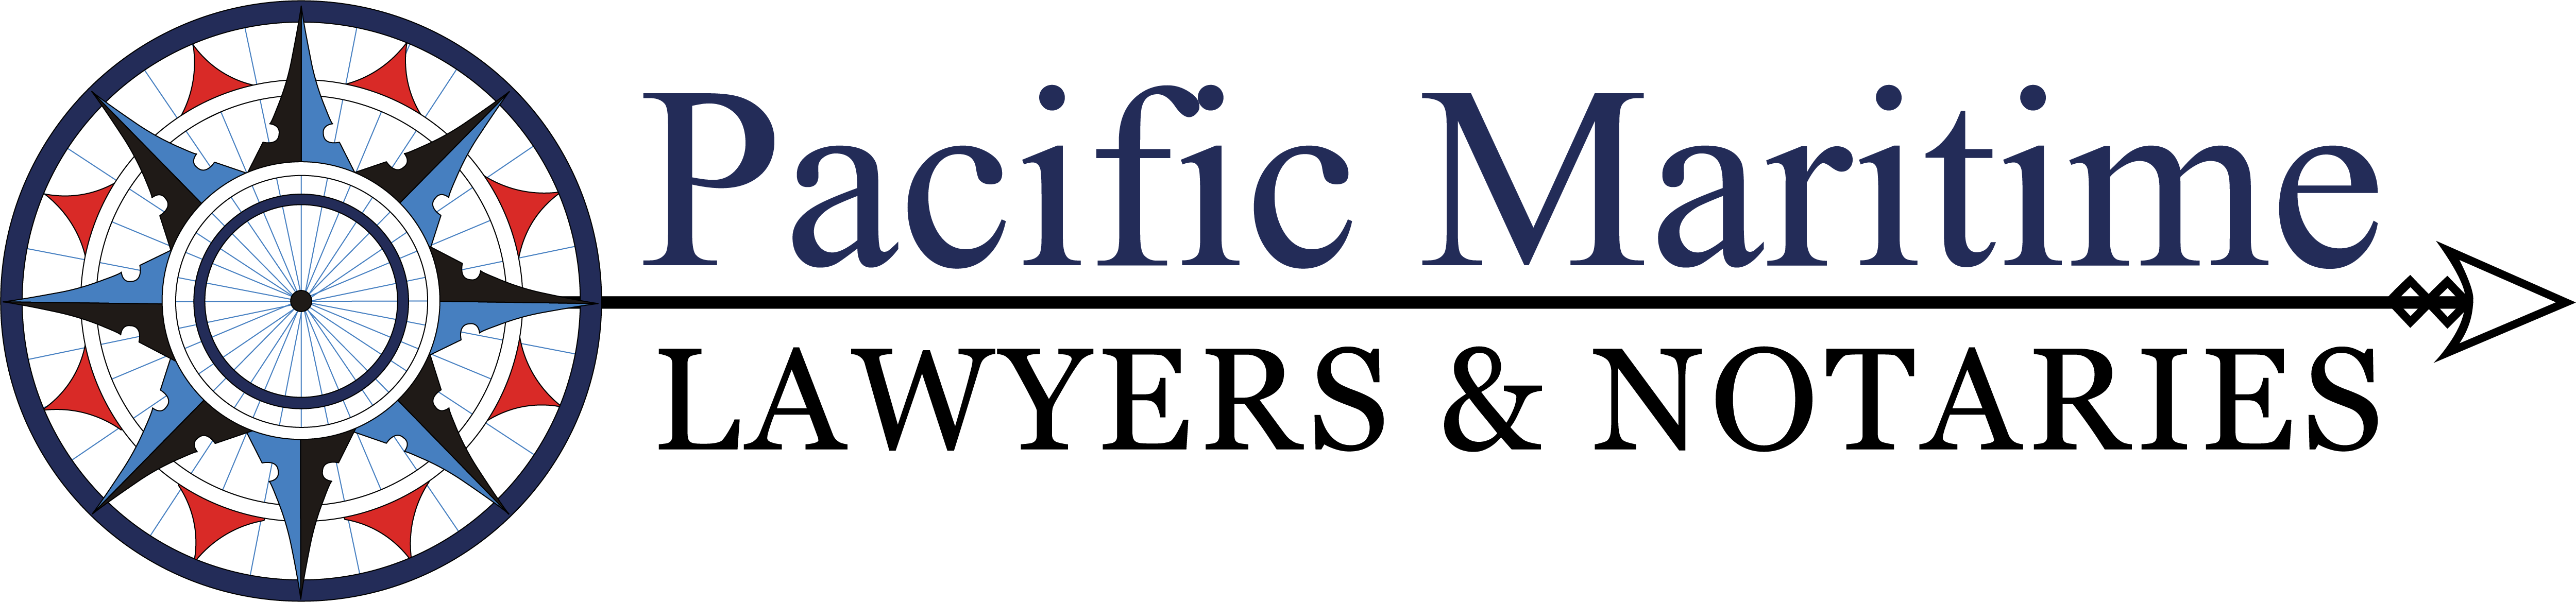 Pacific Maritime Lawyers